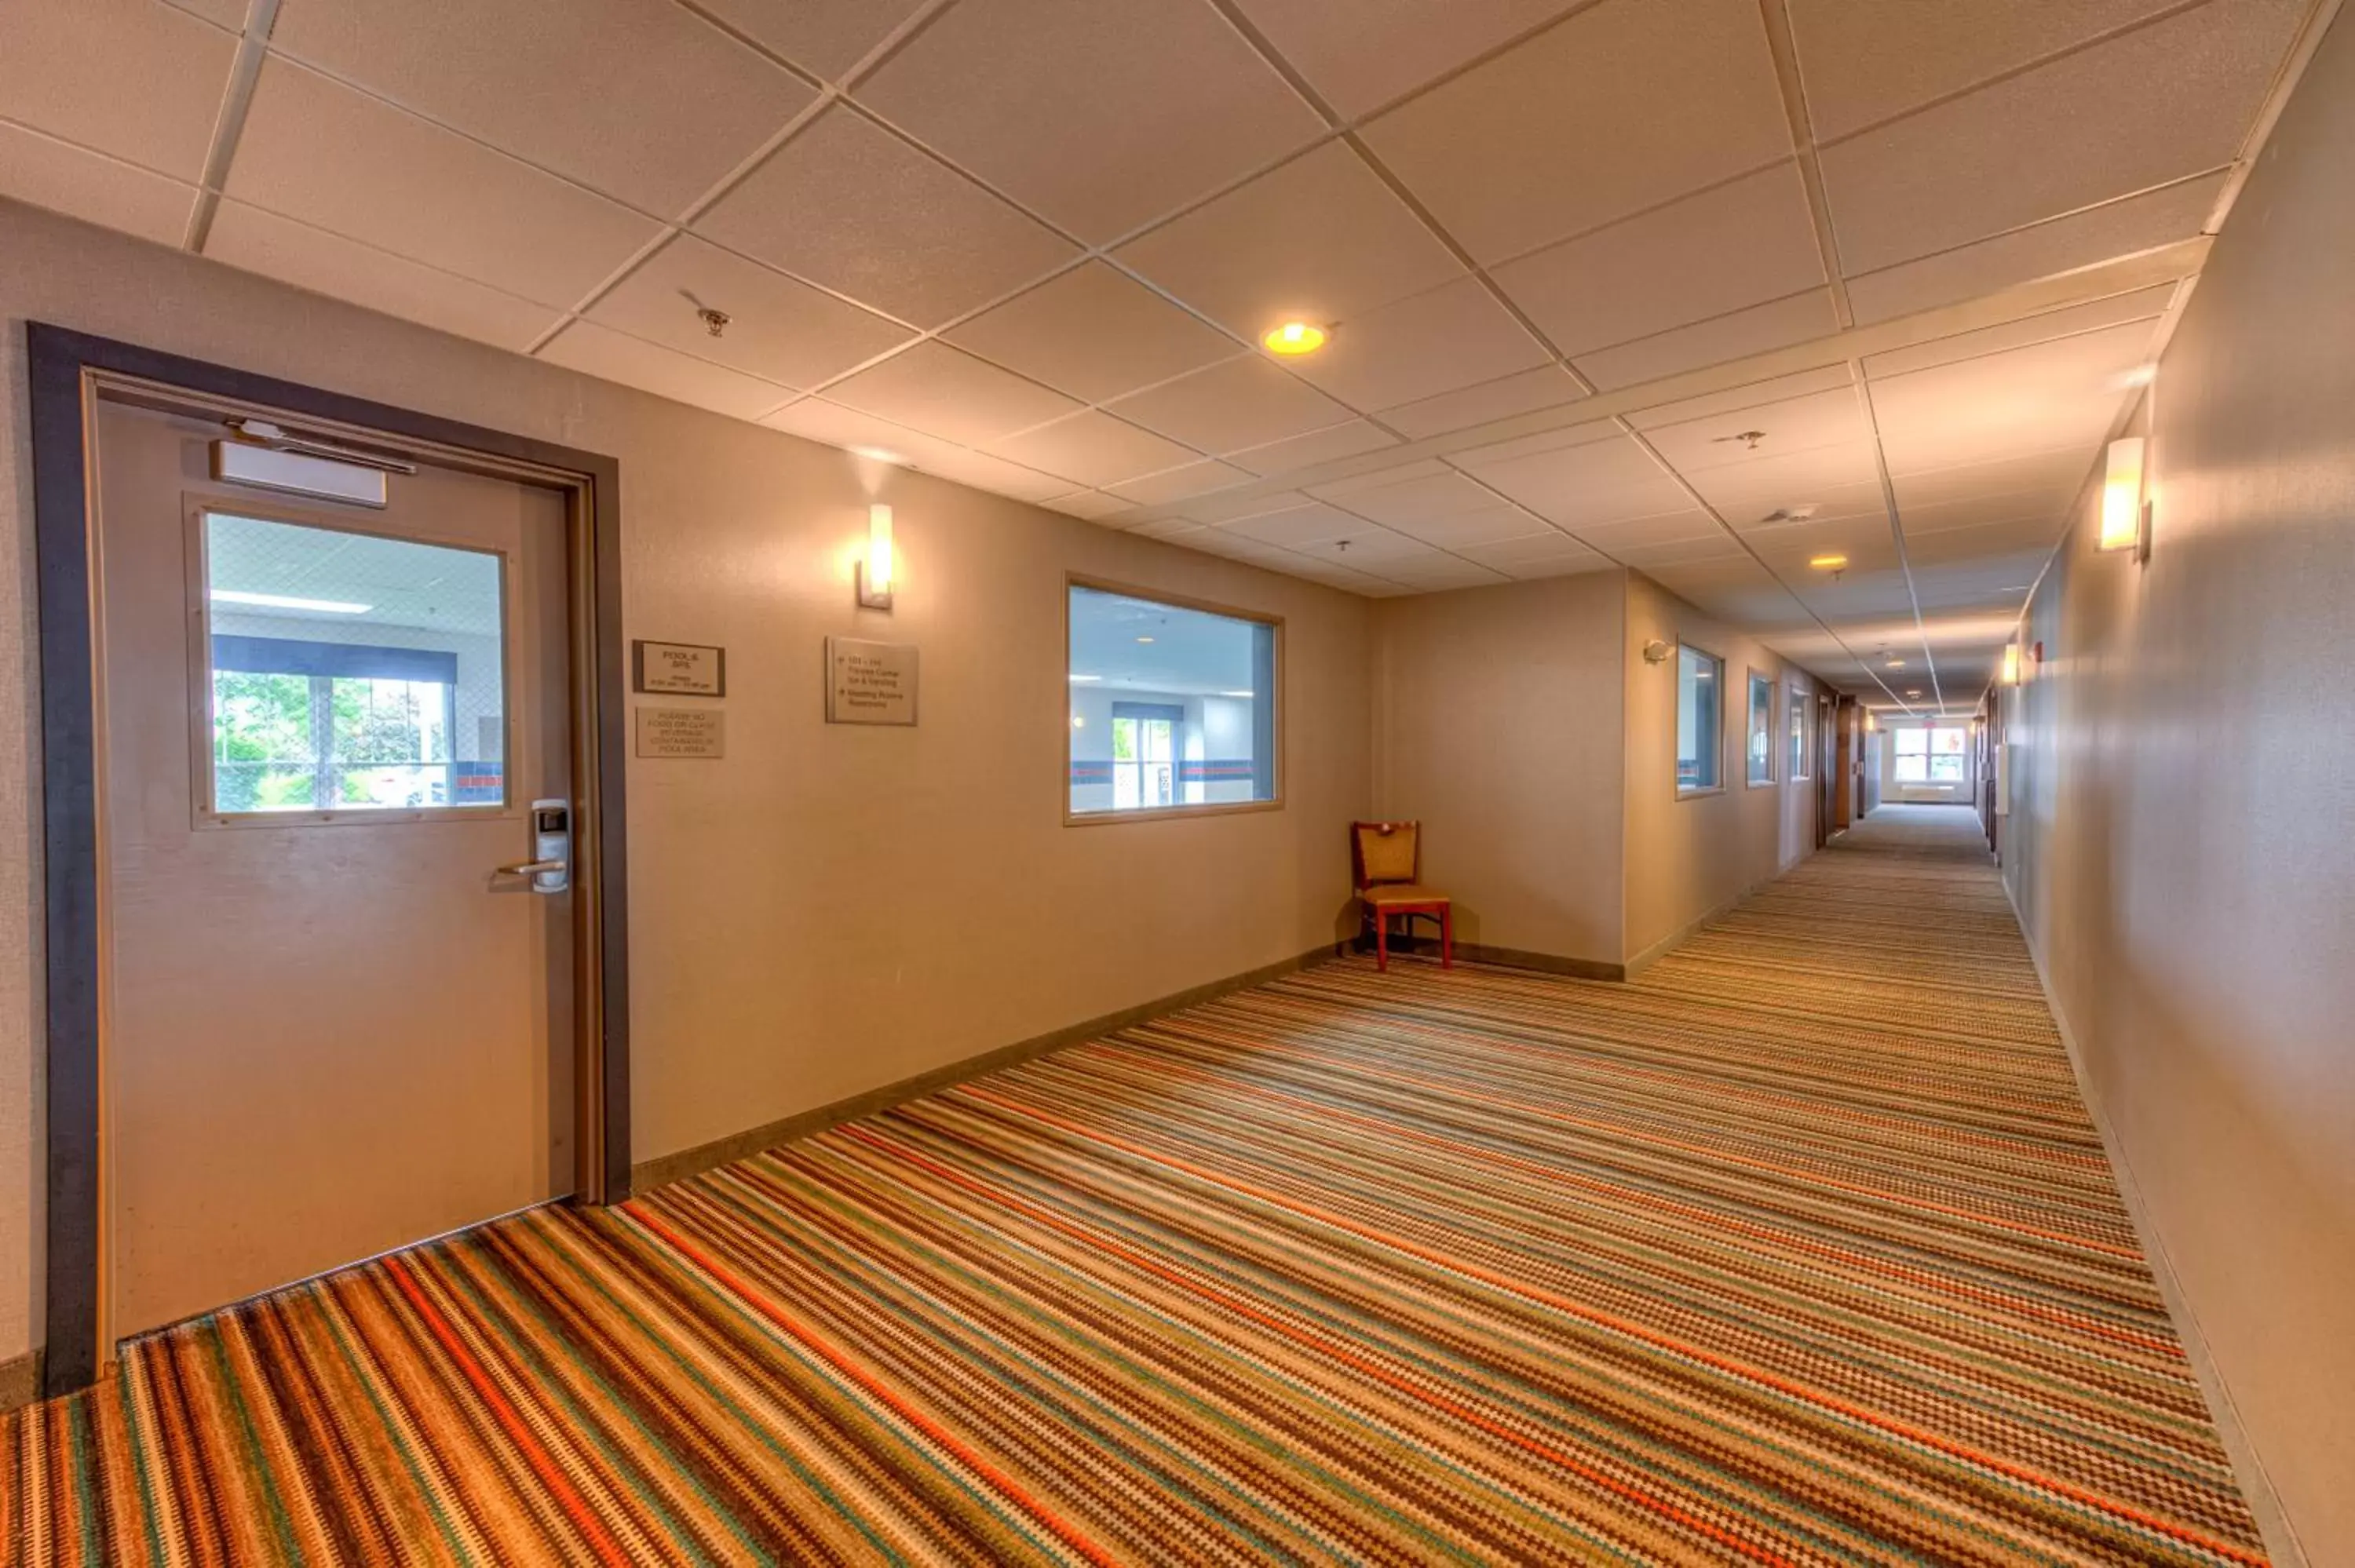 Lobby or reception in Country Inn & Suites by Radisson, Crystal Lake, IL